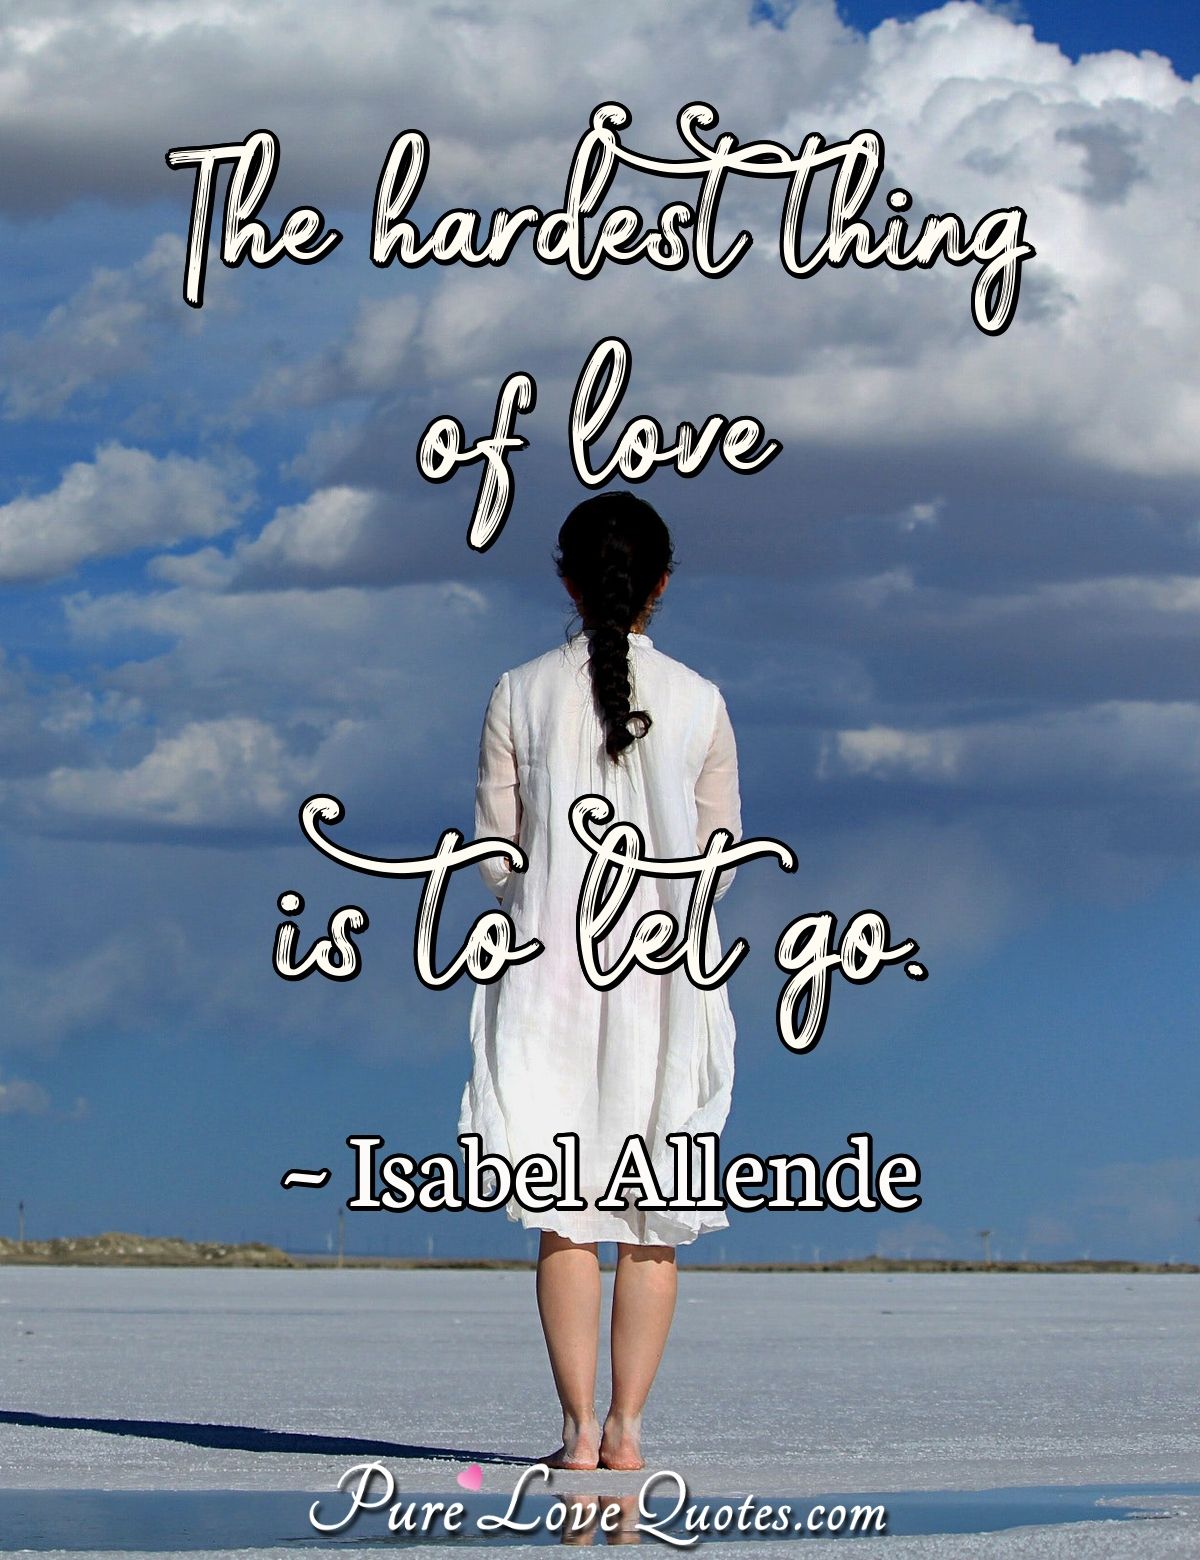 The hardest thing of love is to let go. - Isabel Allende